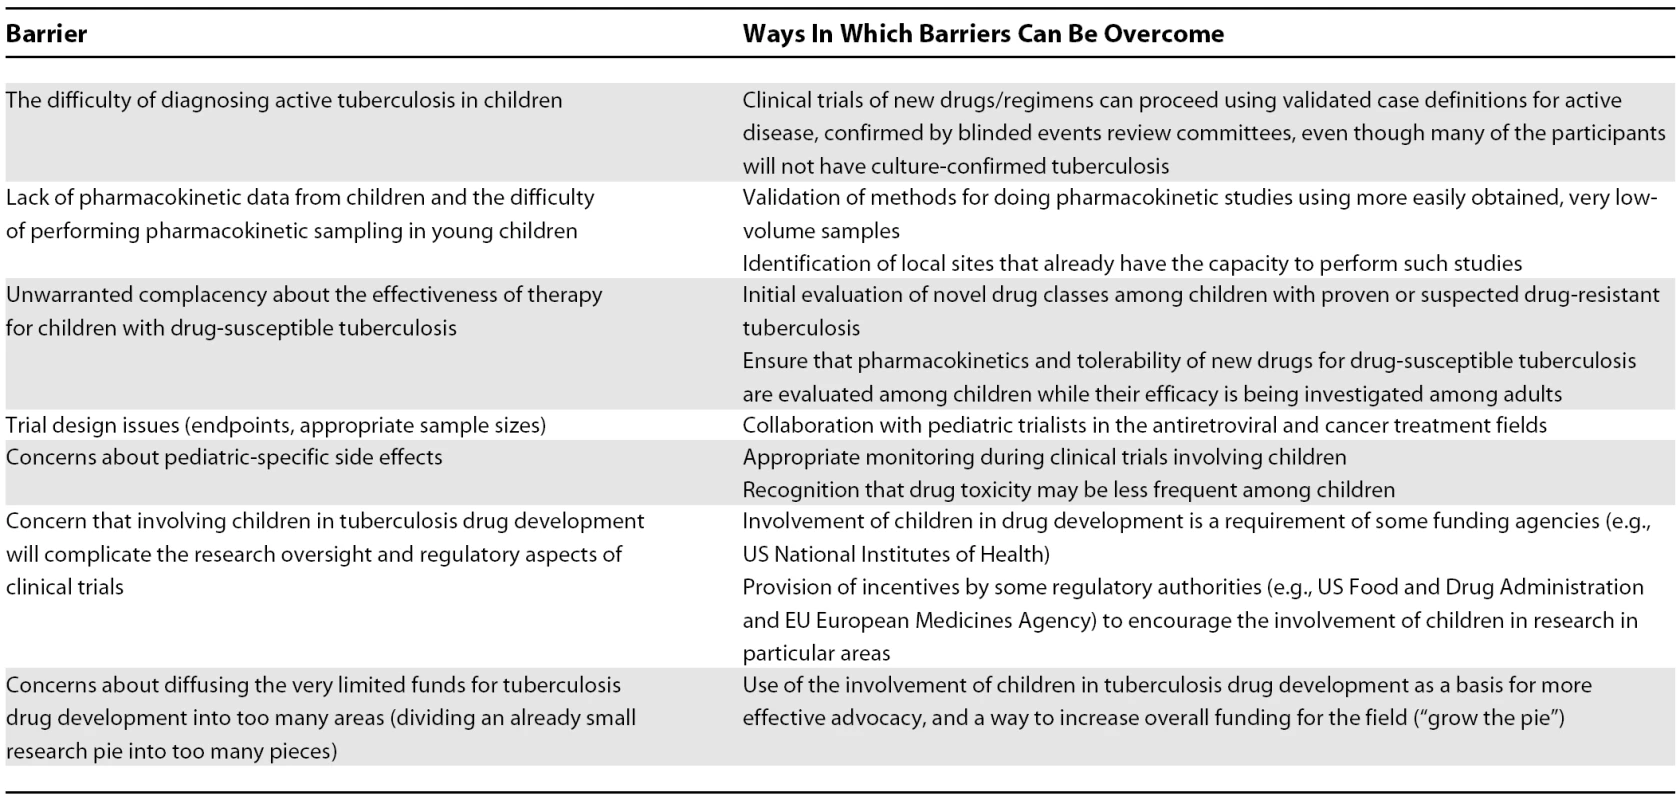 Summary of Barriers to the Involvement of Children in Tuberculosis Drug Development and Suggested Ways to Overcome Them